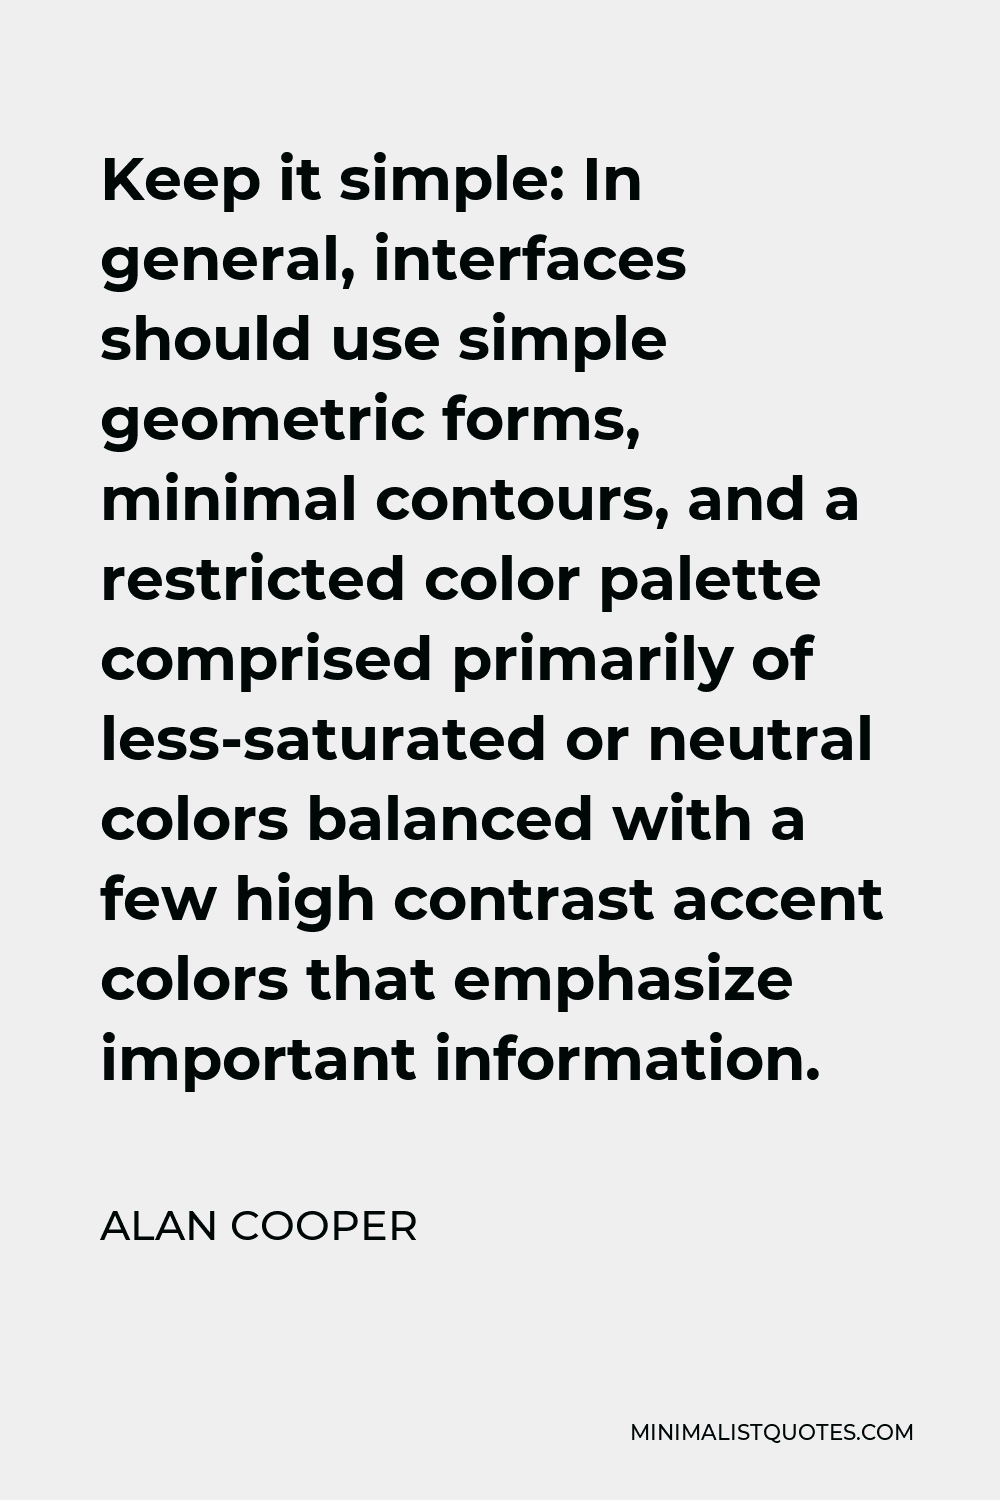 Alan Cooper Quote - Keep it simple: In general, interfaces should use simple geometric forms, minimal contours, and a restricted color palette comprised primarily of less-saturated or neutral colors balanced with a few high contrast accent colors that emphasize important information.